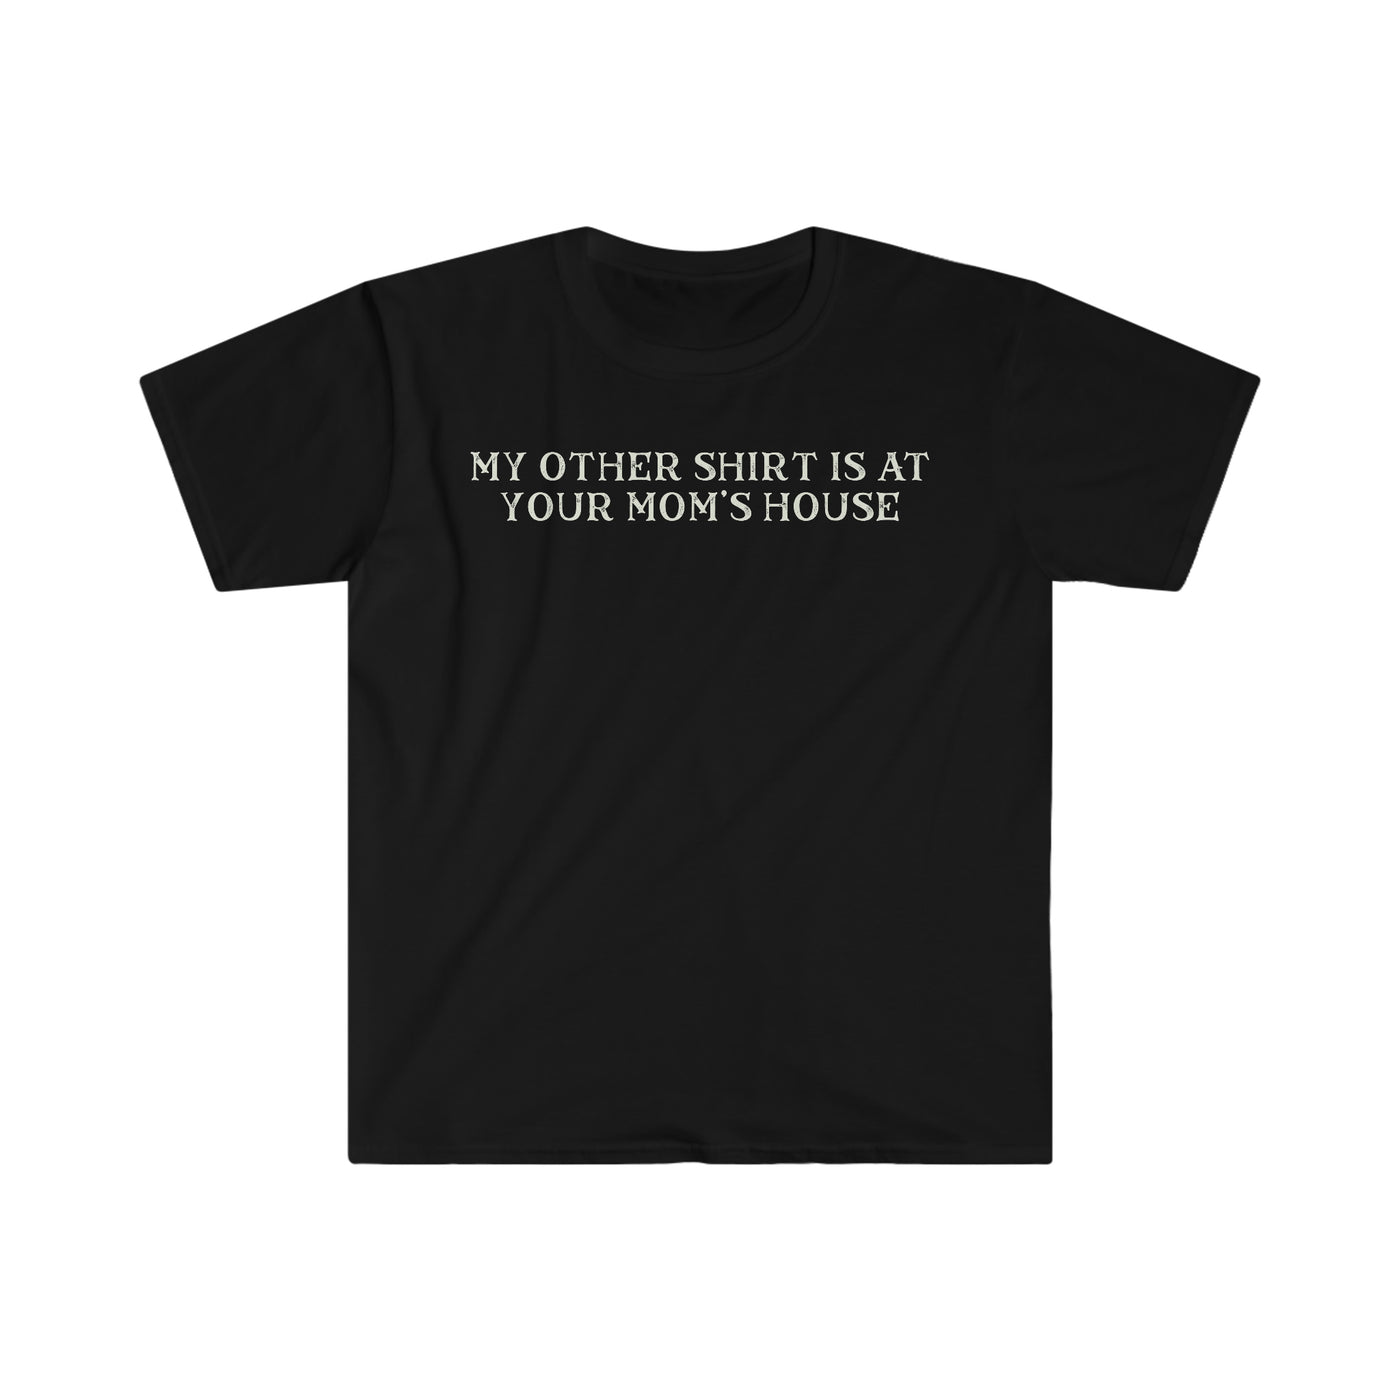 My Other Shirt Is At Your Mom's House Unisex T-Shirt